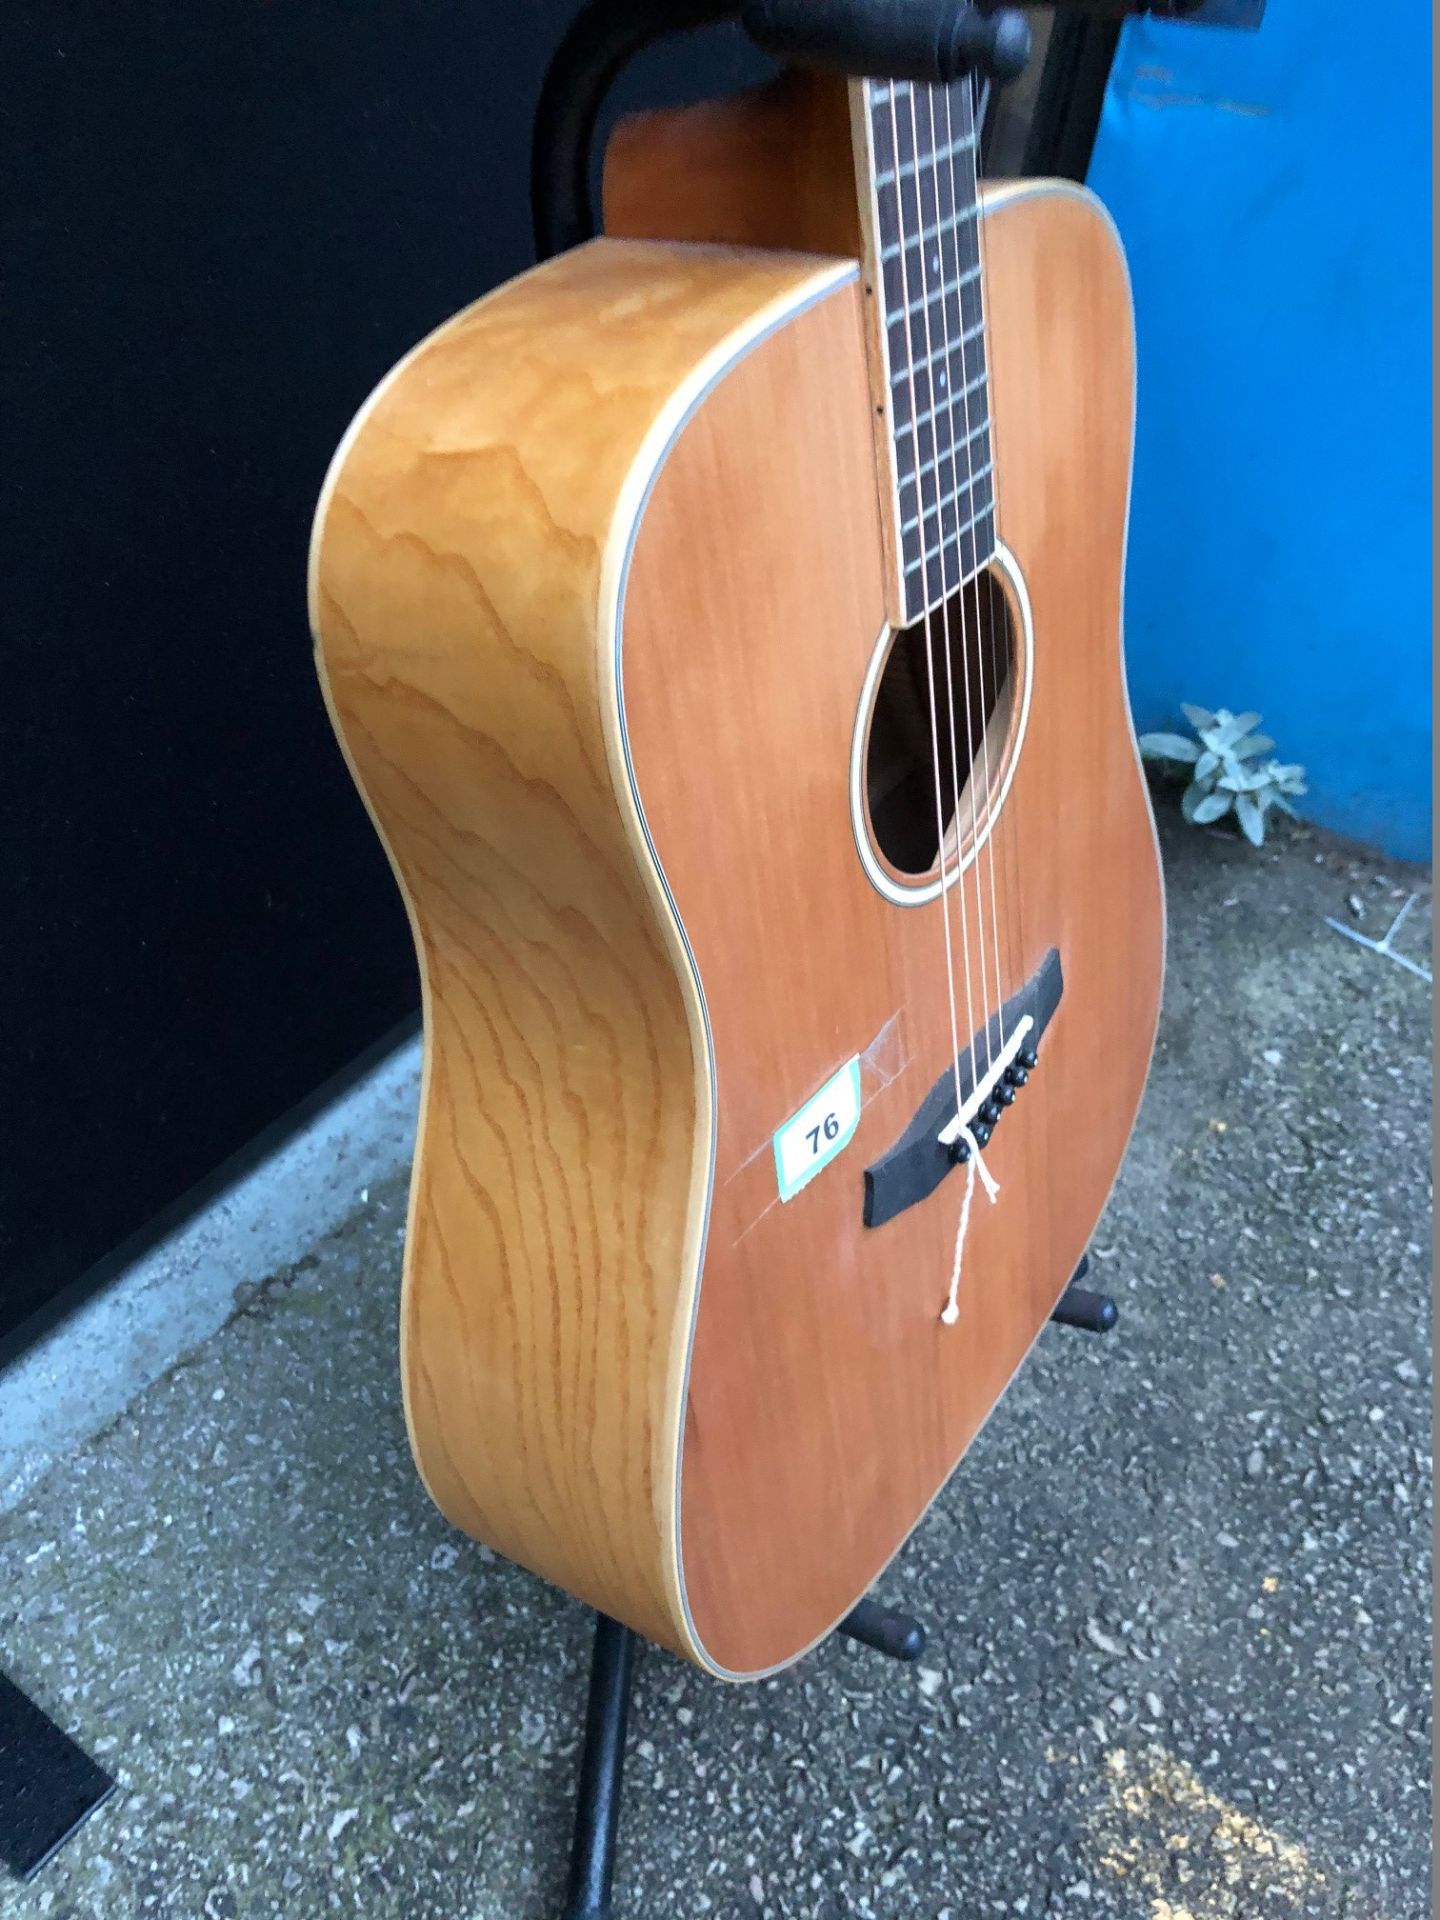 Tanglewood TW11D OL Olive Wood Acoustic Guitar (Brand New Ex Display - RRP £299.00) - Image 3 of 6